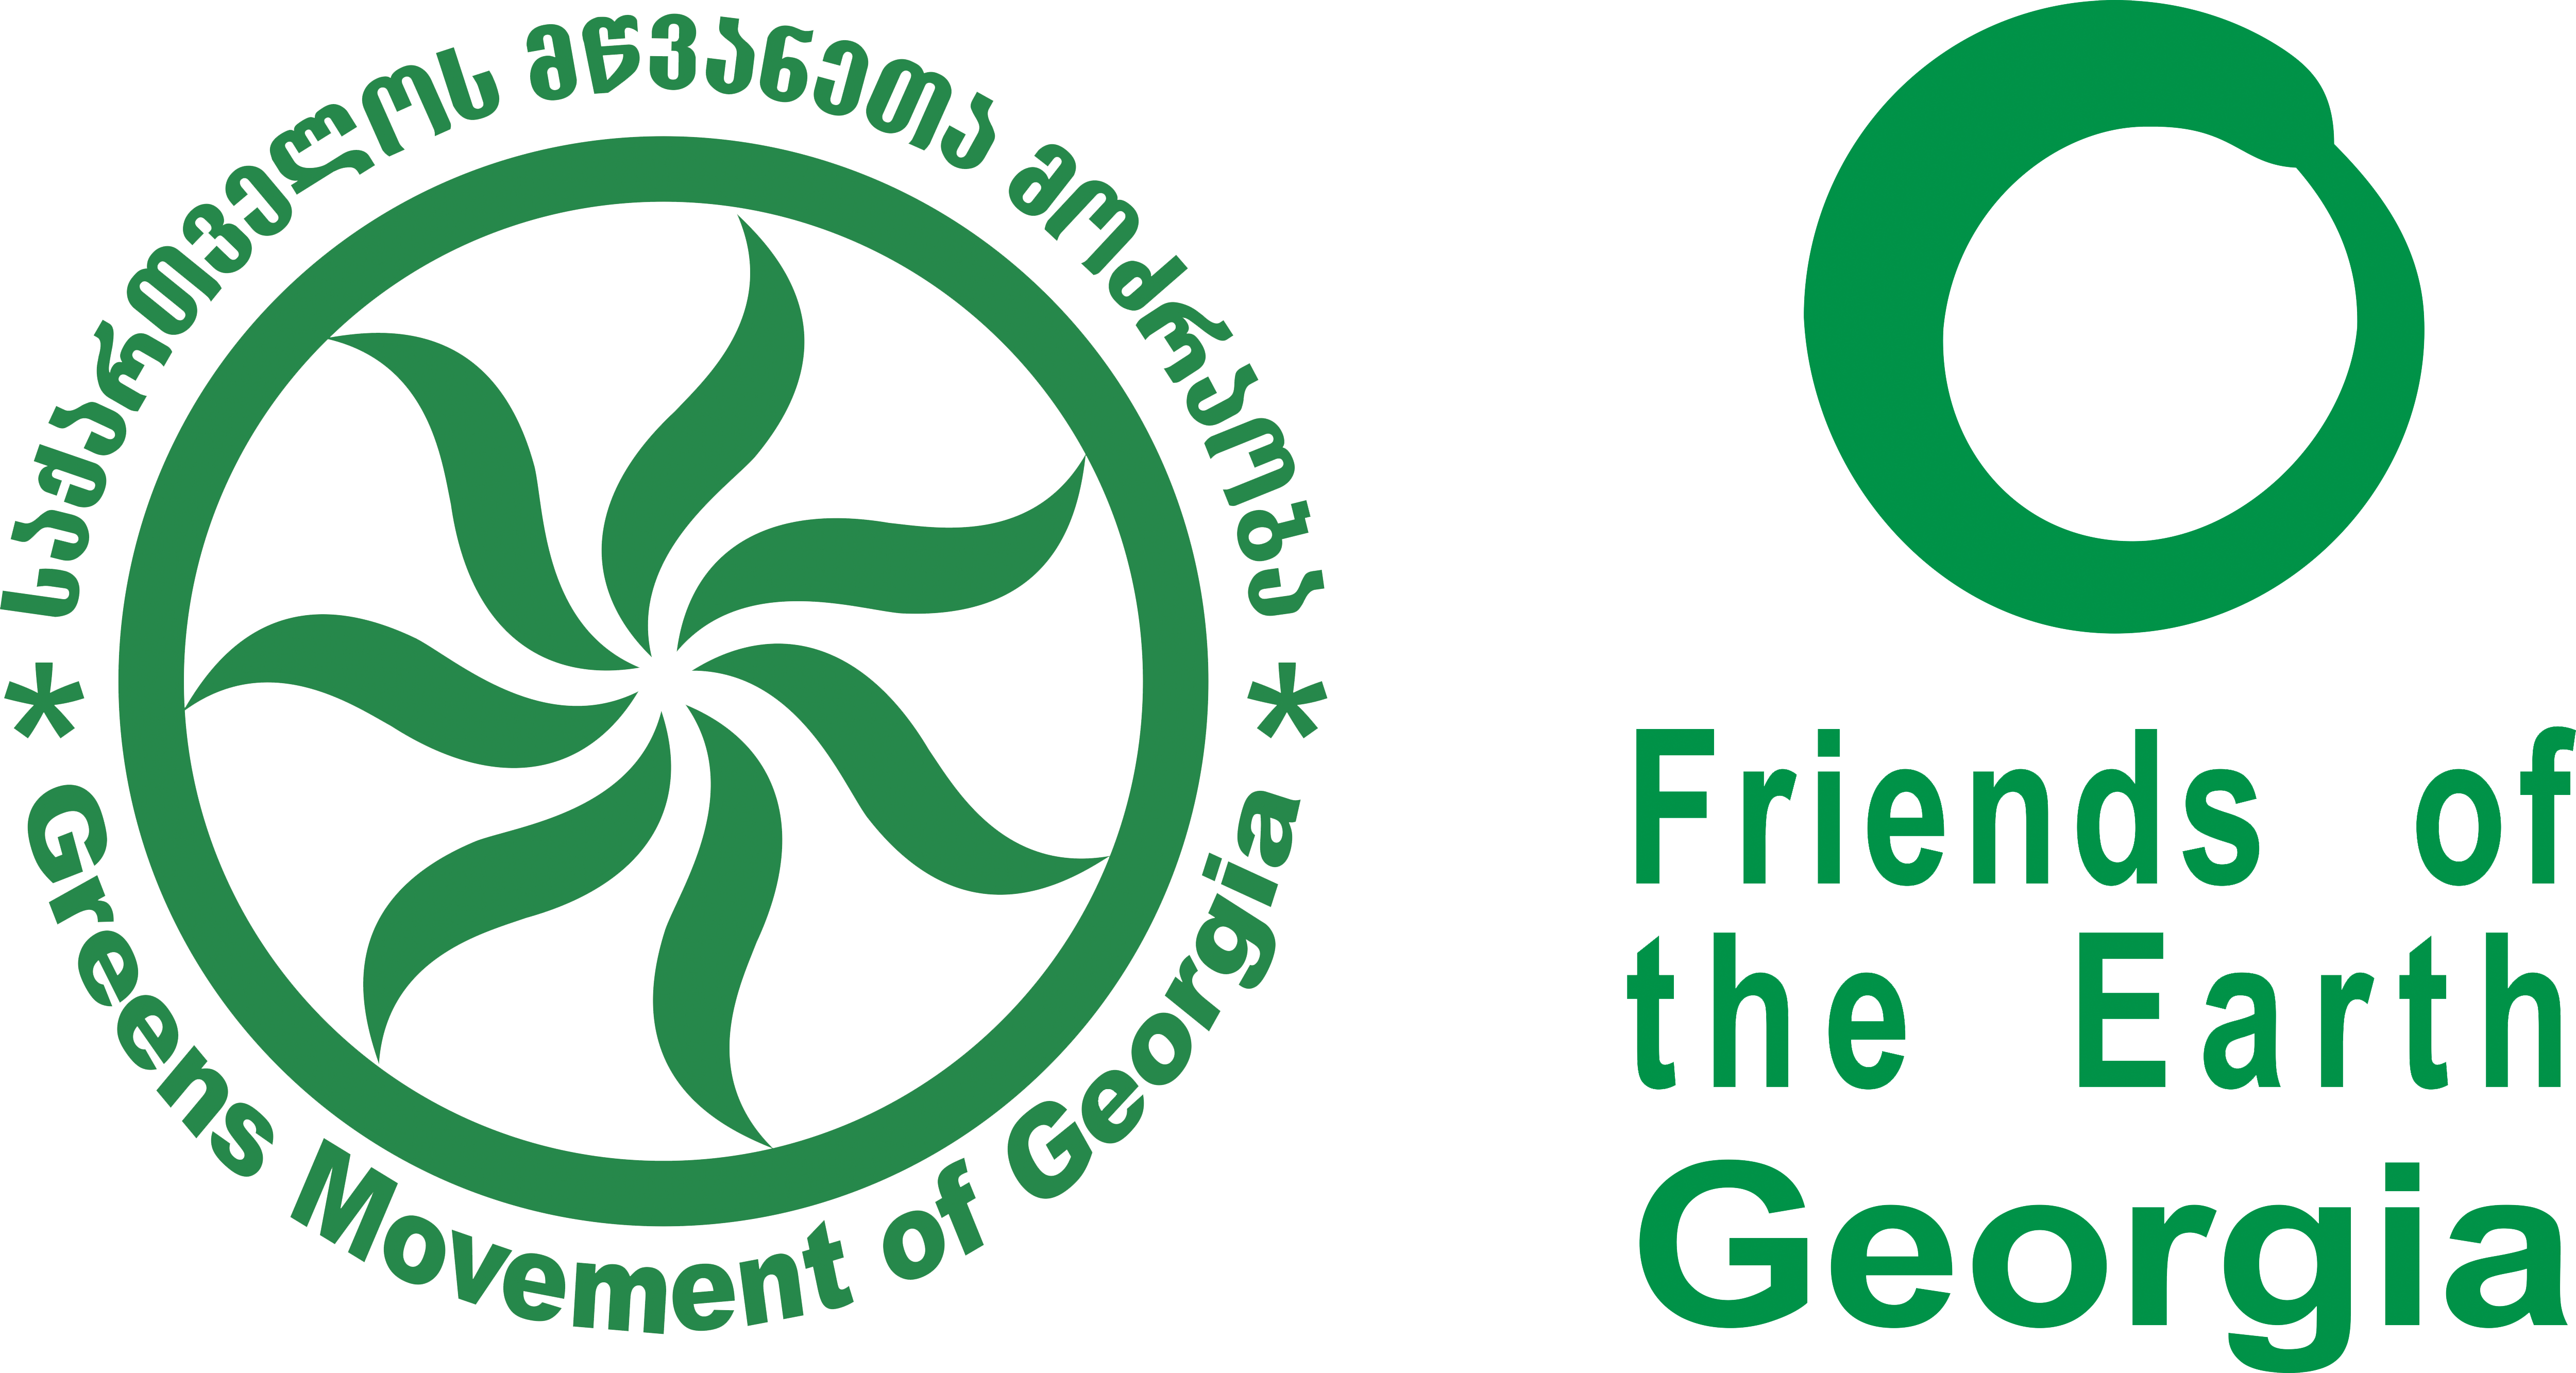 The Greens Movement of Georgia/Friends of the Earth